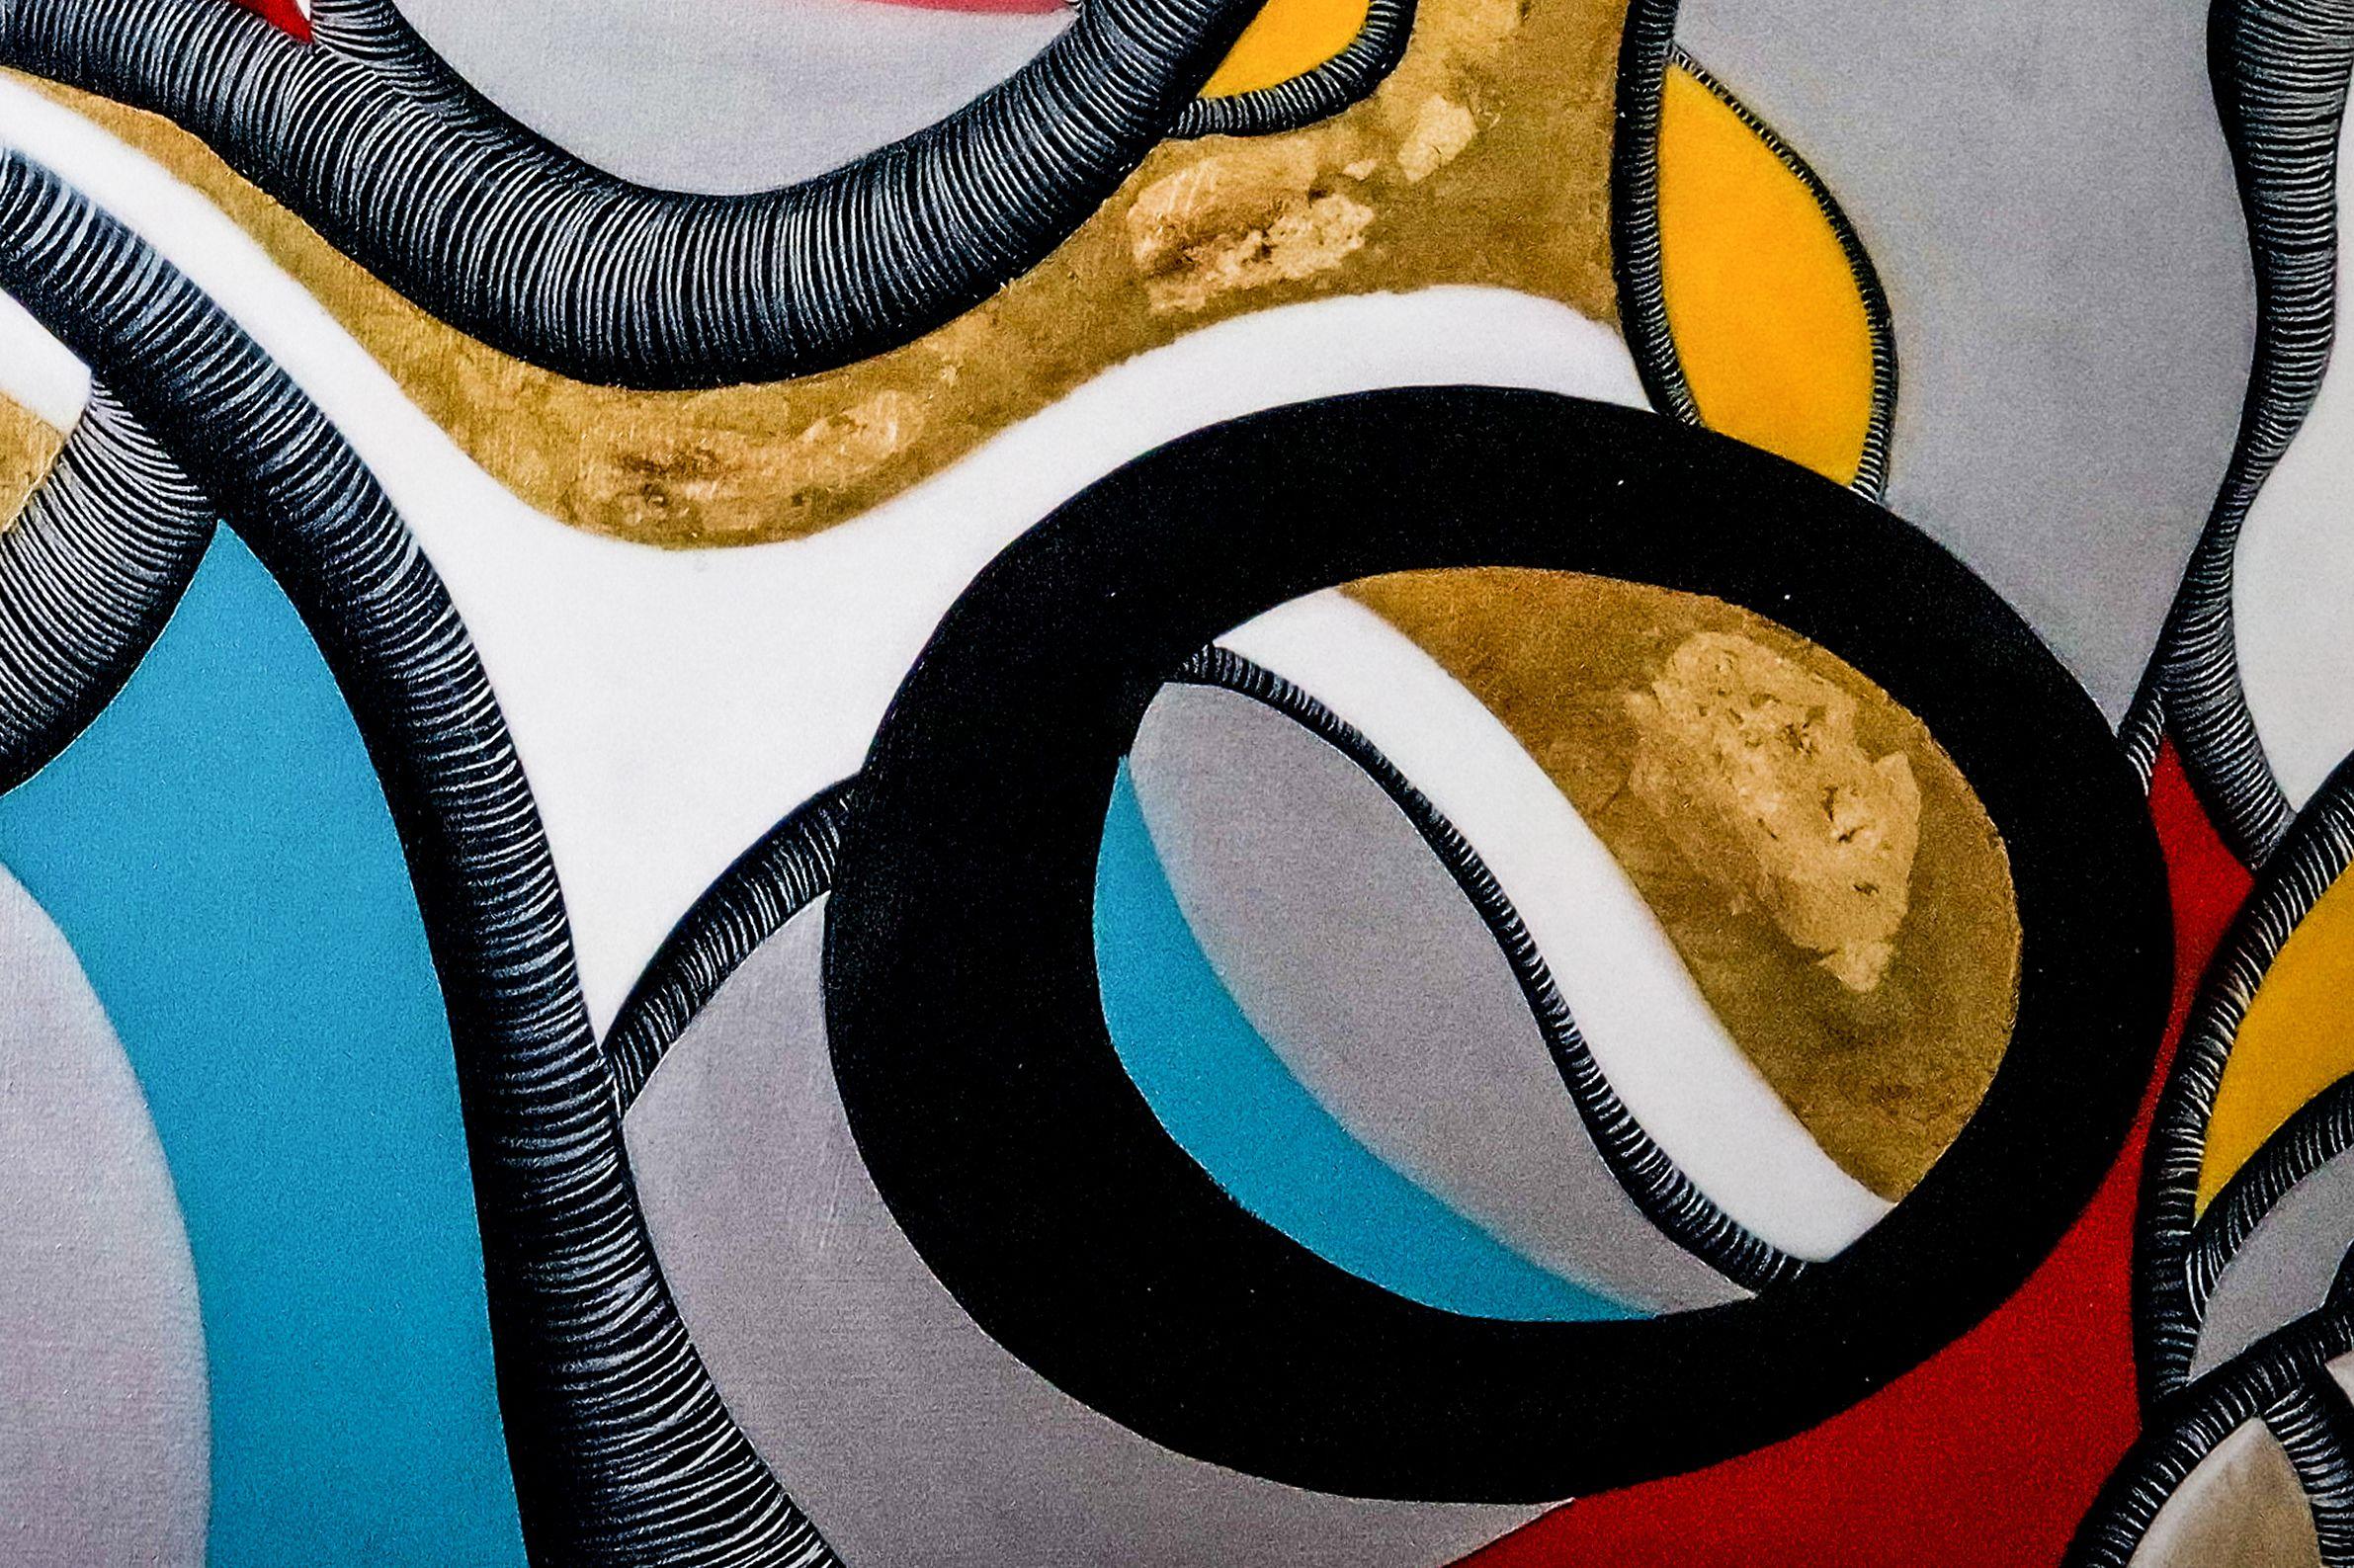 This work has a dynamic and playful composition with red, turquoise, yellow, silver and gold color. â€¢ PICTURE HANGER ATTACHED: Yes â€¢ SIDES PAINTED: Yes â€¢ READY TO HANG: Yes â€¢ ARTIST SIGNED: Yes â€¢ CERTIFICATE OF AUTHENTICITY: Yes, This is